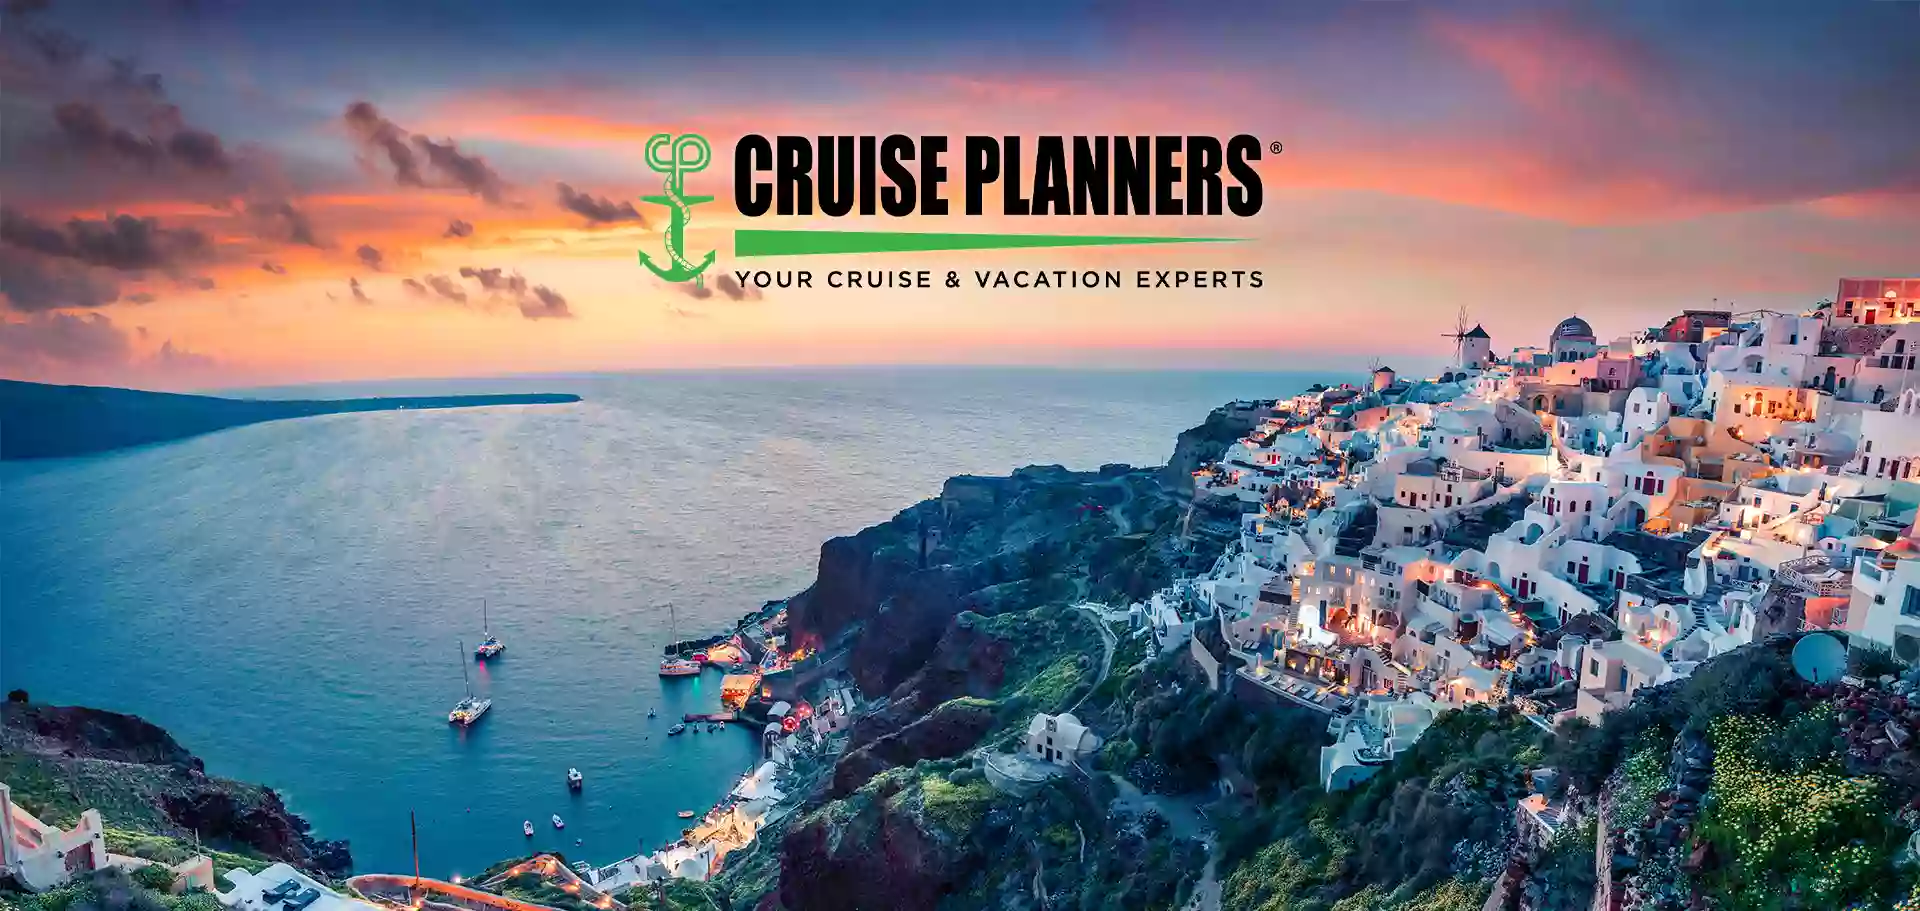 Just Cruises & More (NOW) CRUISE PLANNERS